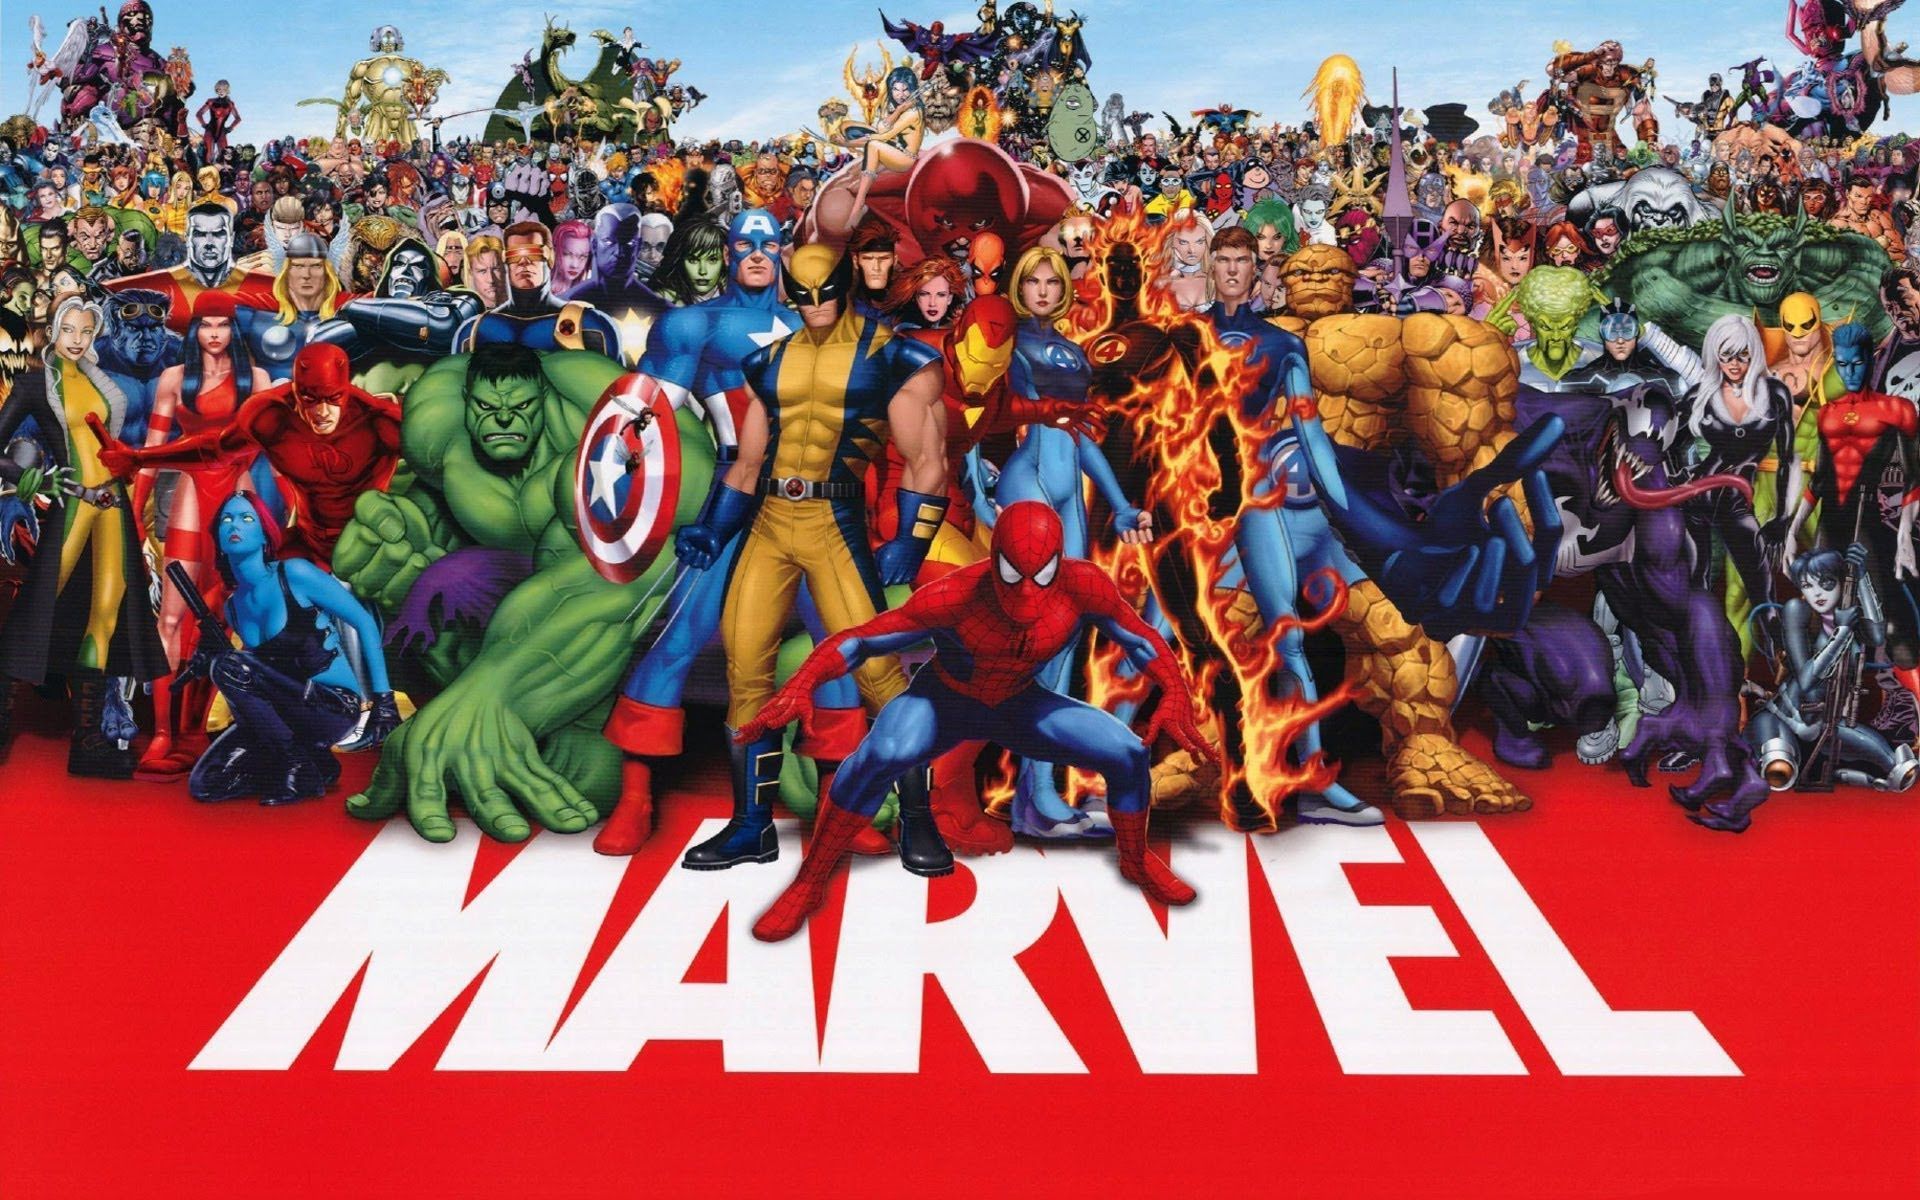 Marvel Heroes Opening intro 1080p HD 720p @ GamersGames @ - YouTube